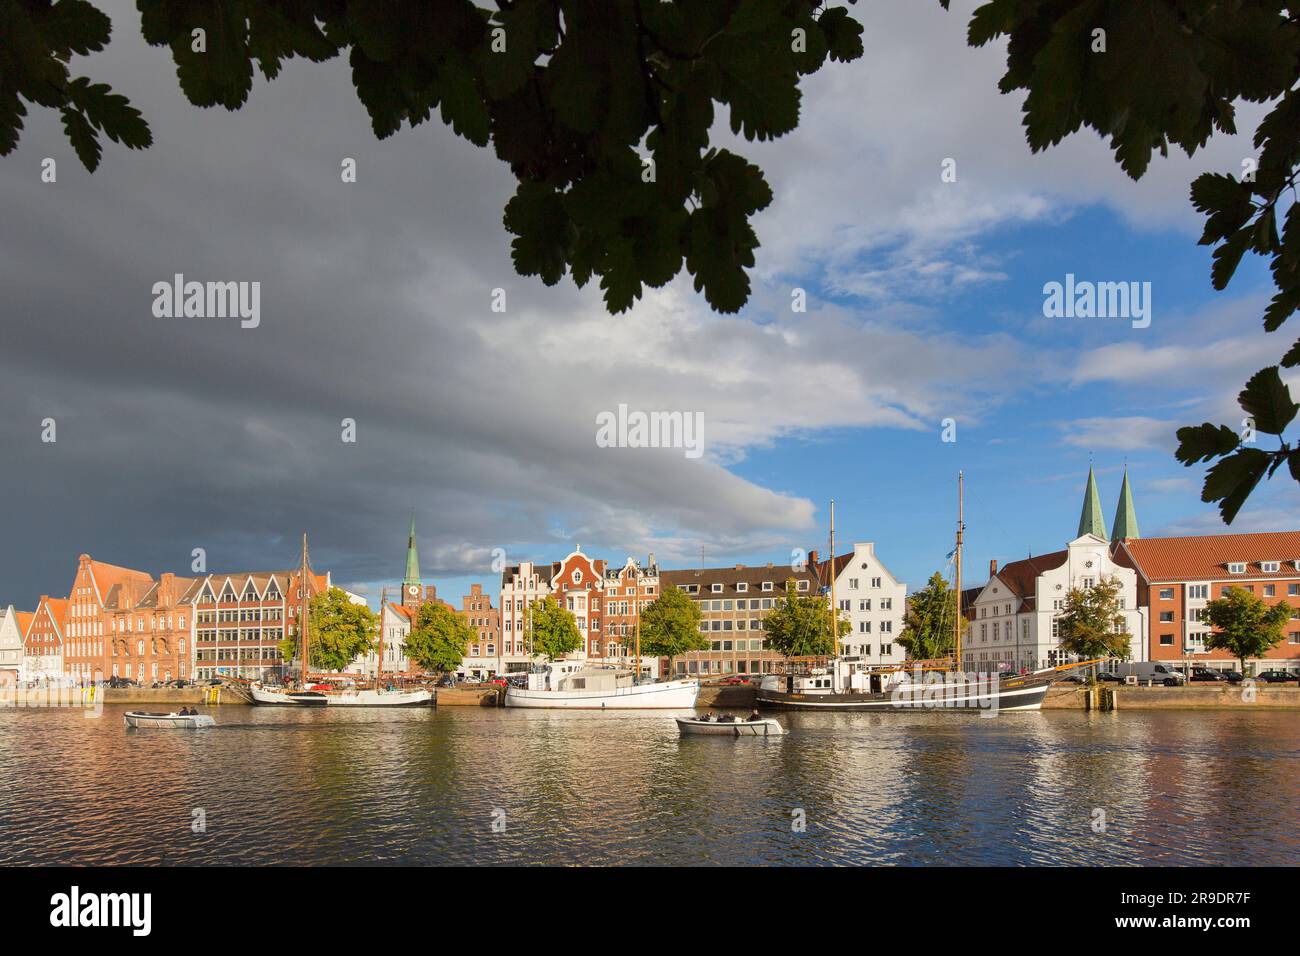 The Museum Harbour, Untertrave, Hanseatic City of Luebeck, Schleswig-Holstein, Germany Stock Photo